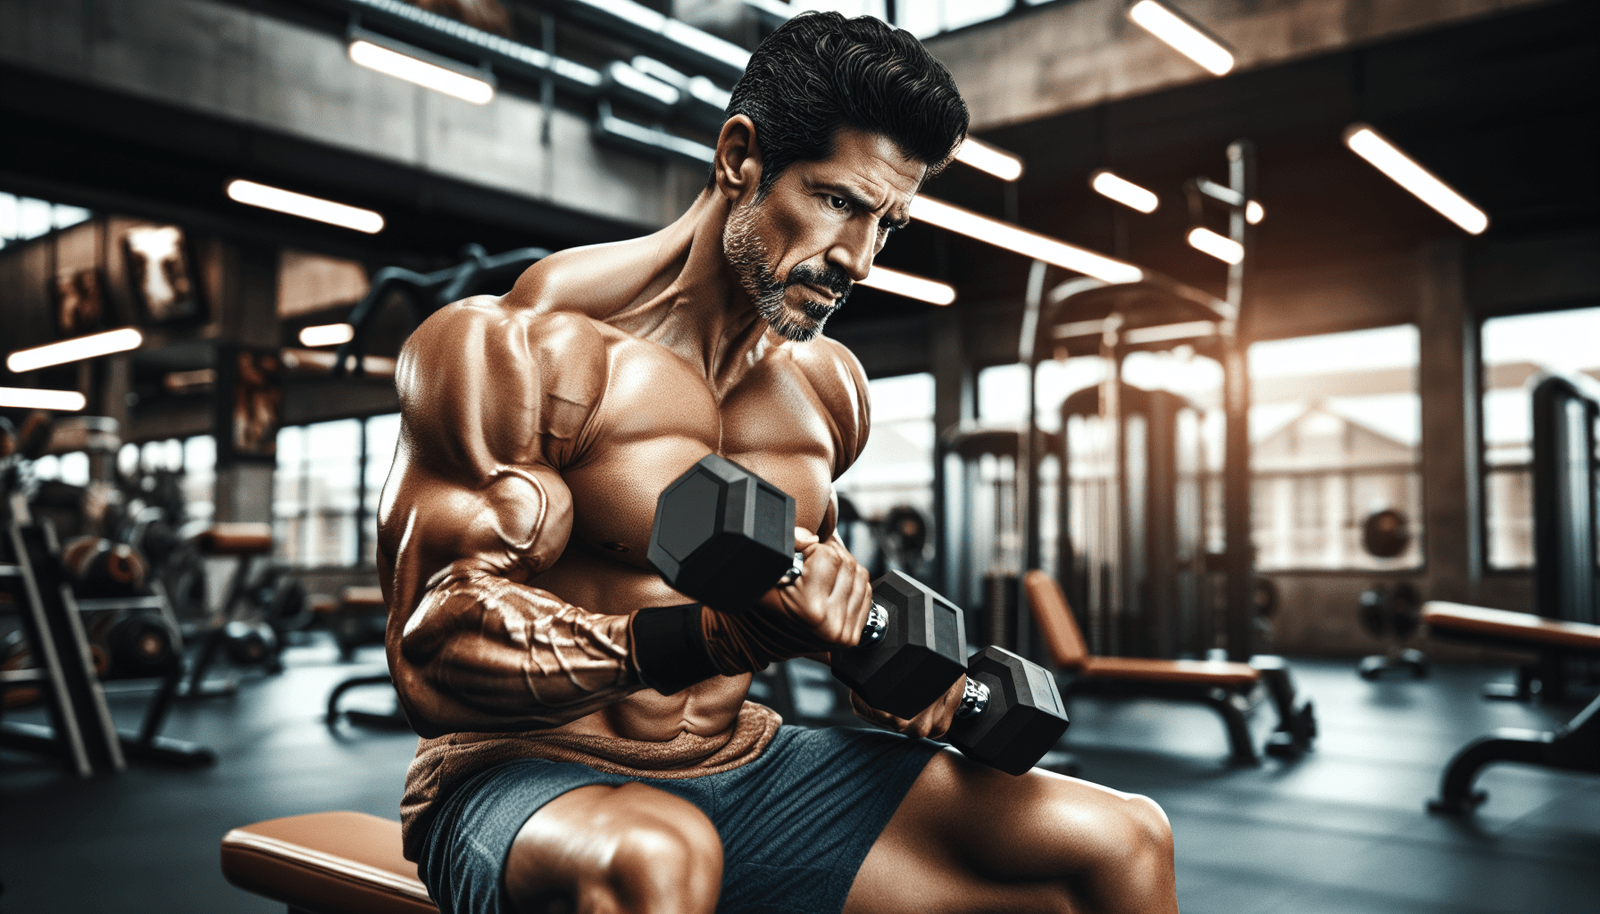 How to Build Muscle in Quick 9 Minute Workouts